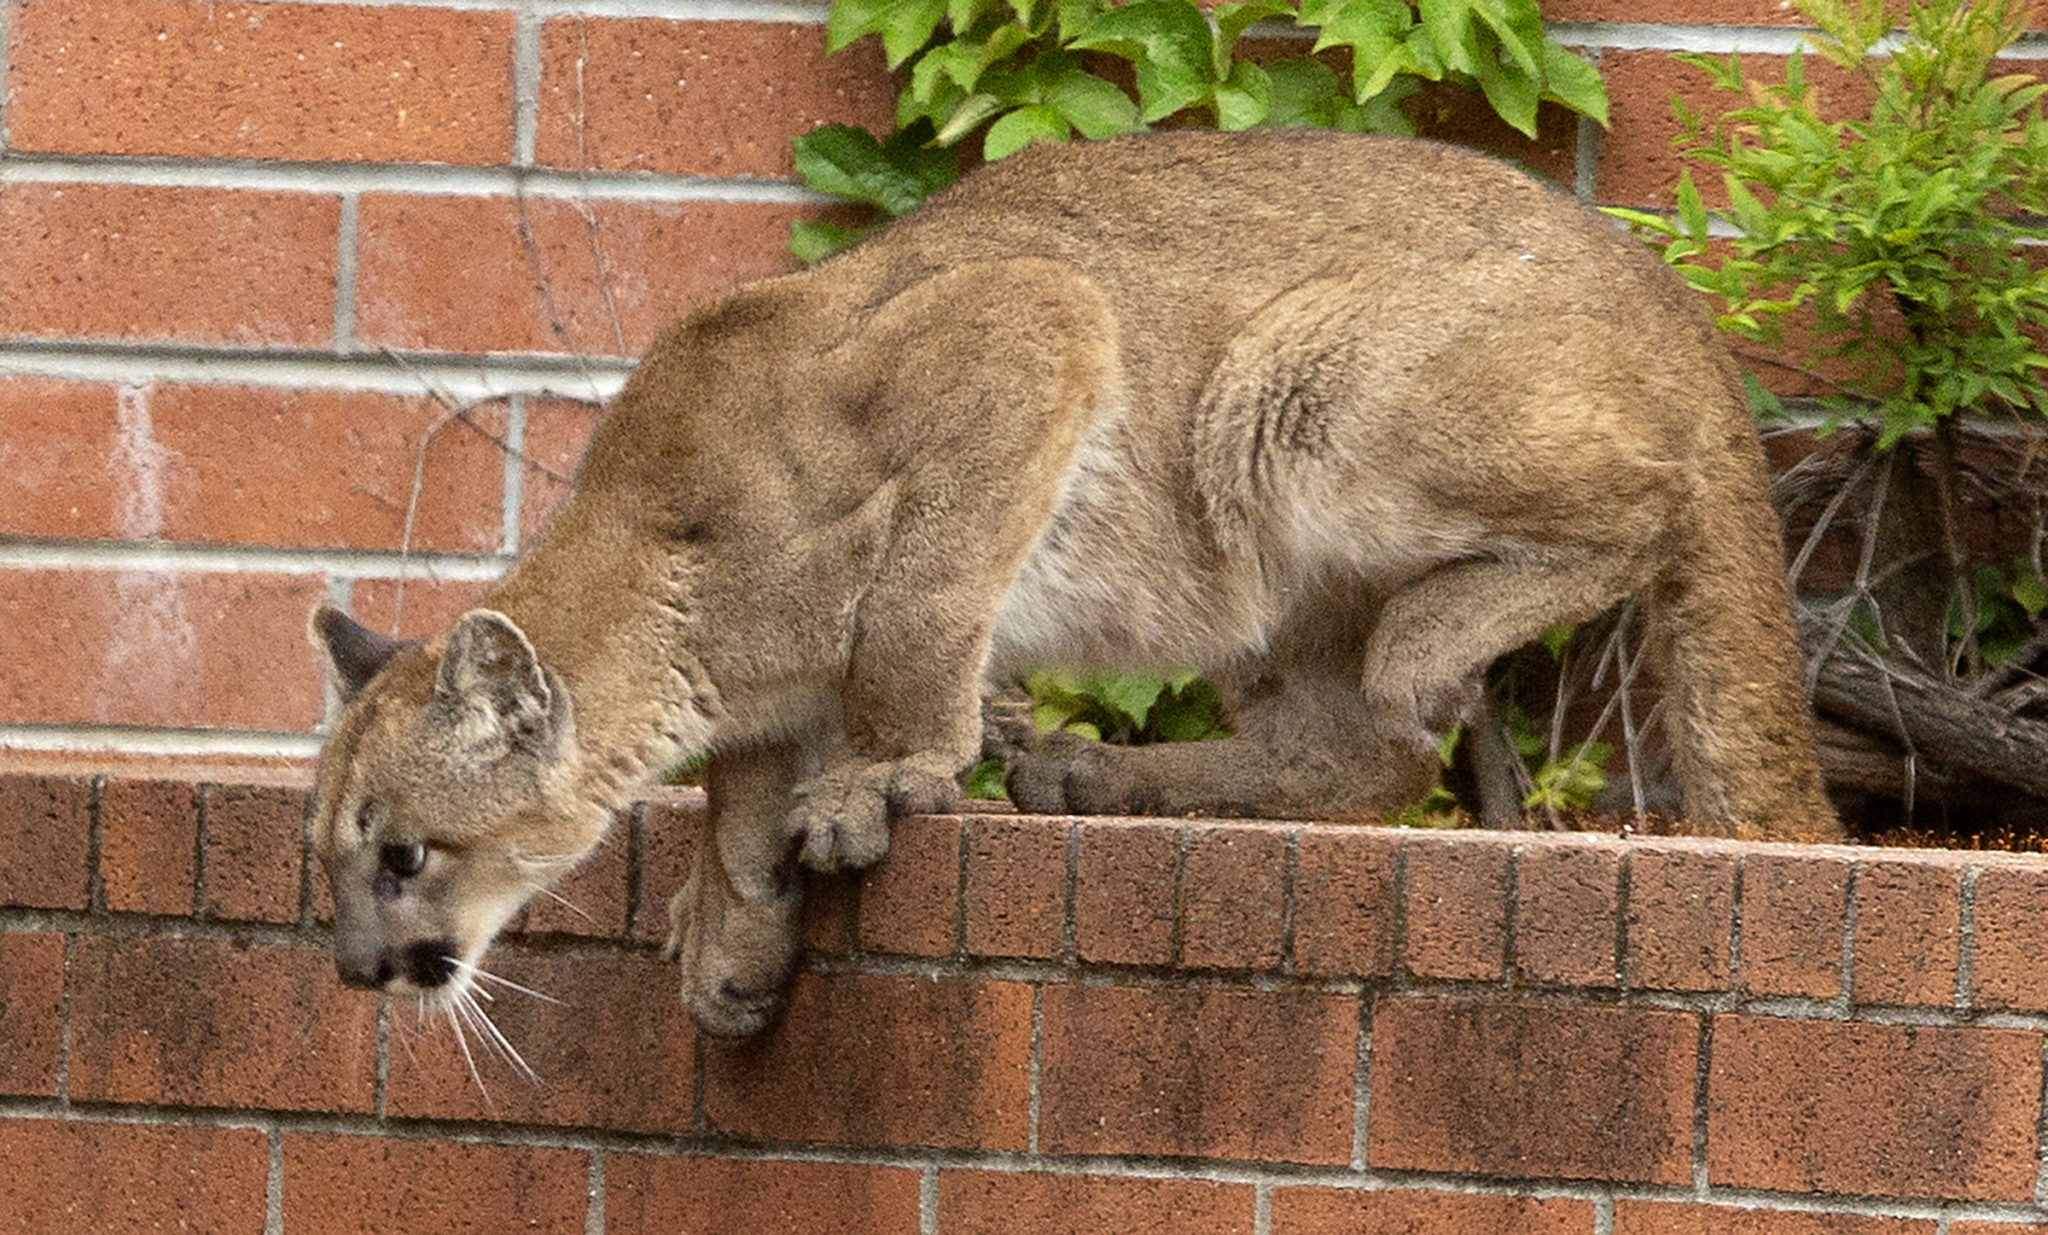 A juvenile mountain lion was darted and removed from a planter box on the east side of Macy's at the Santa Rosa Plaza by California Fish and Wildlife officers on Monday morning. (photo by John Burgess/The Press Democrat)